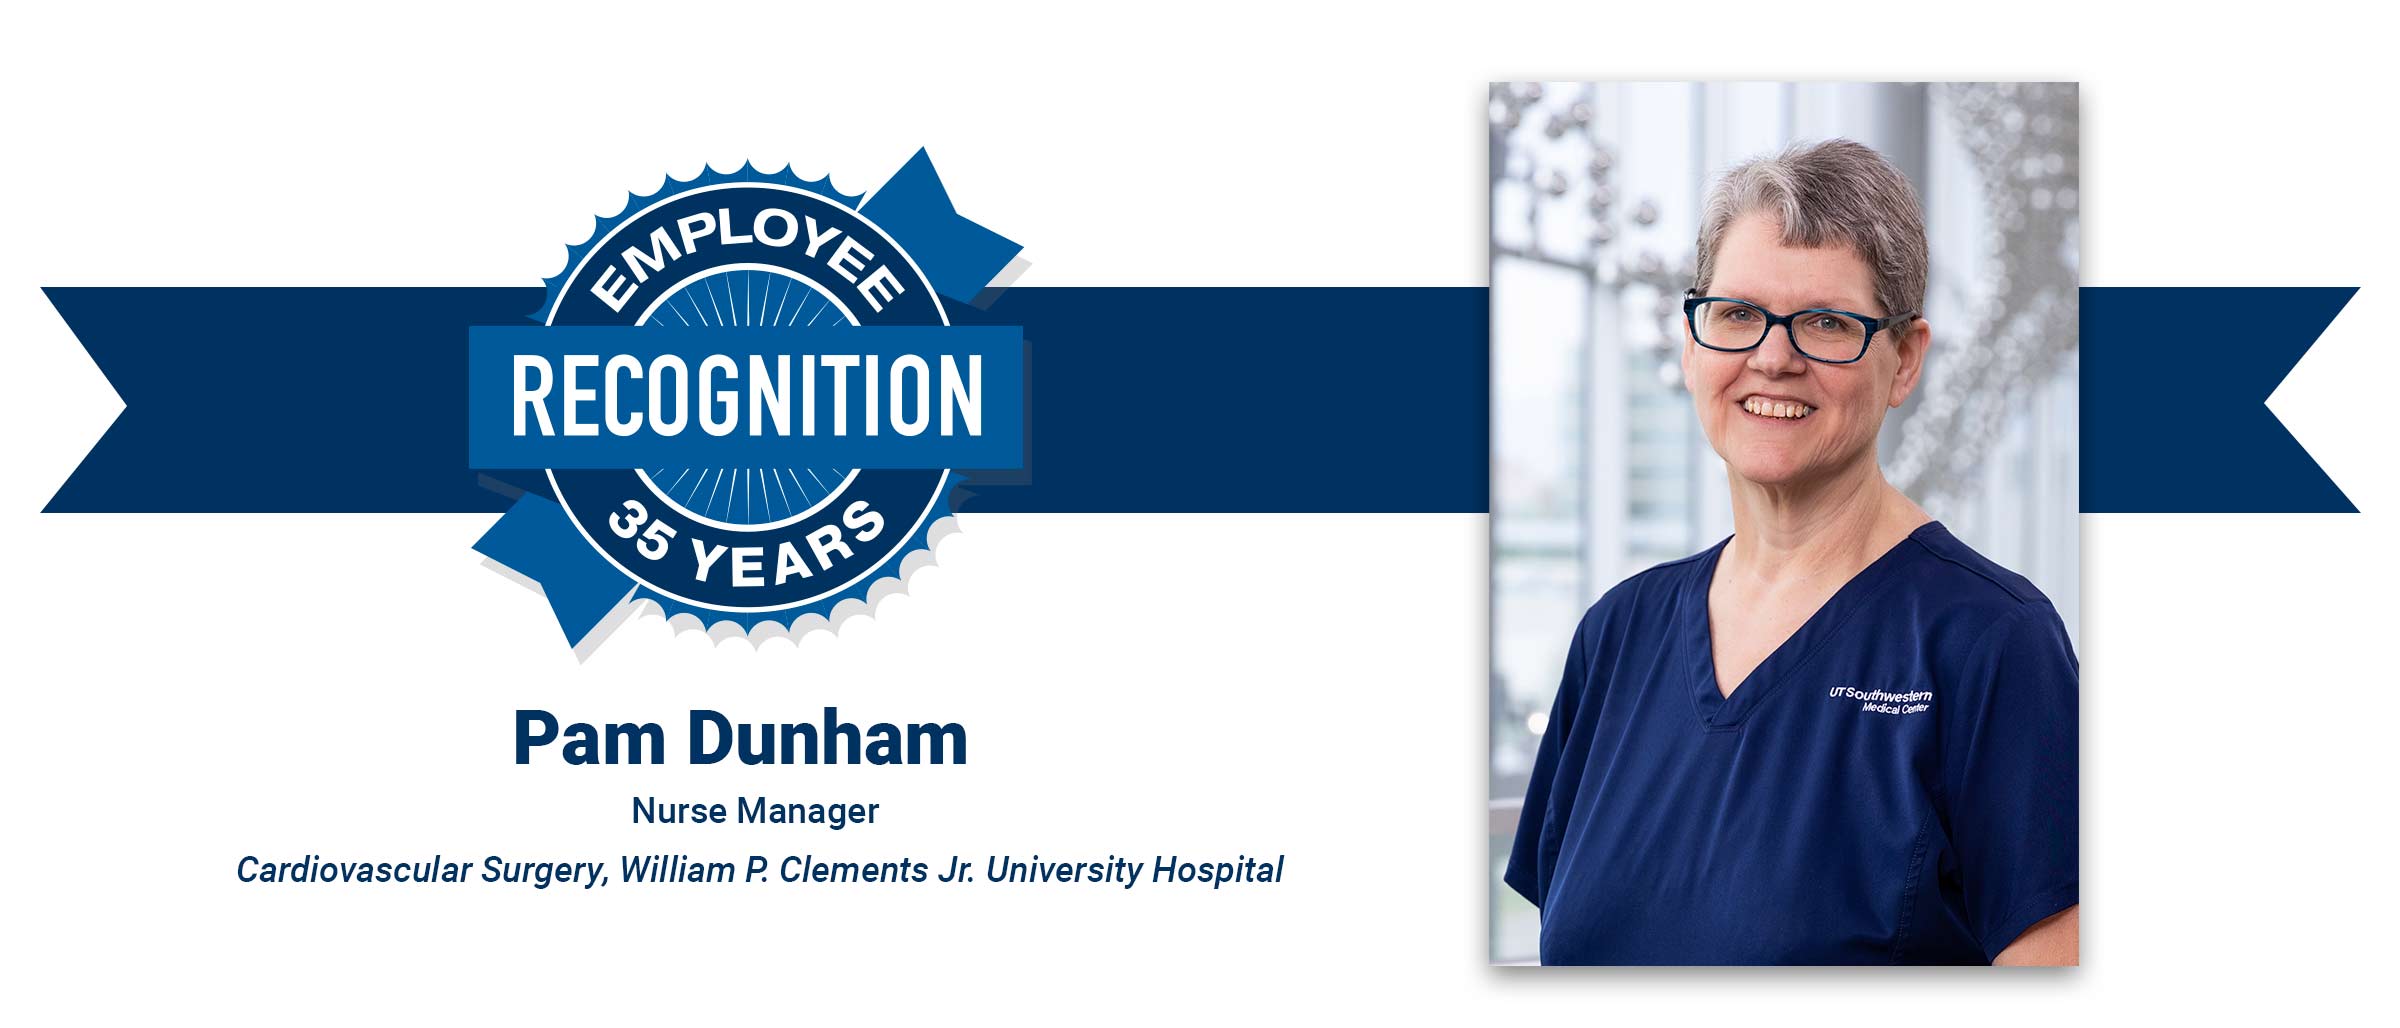 Woman with short grey hair, wearing glasses and blue UTSW scrubs. Pam Dunham, 35 years employee recognition